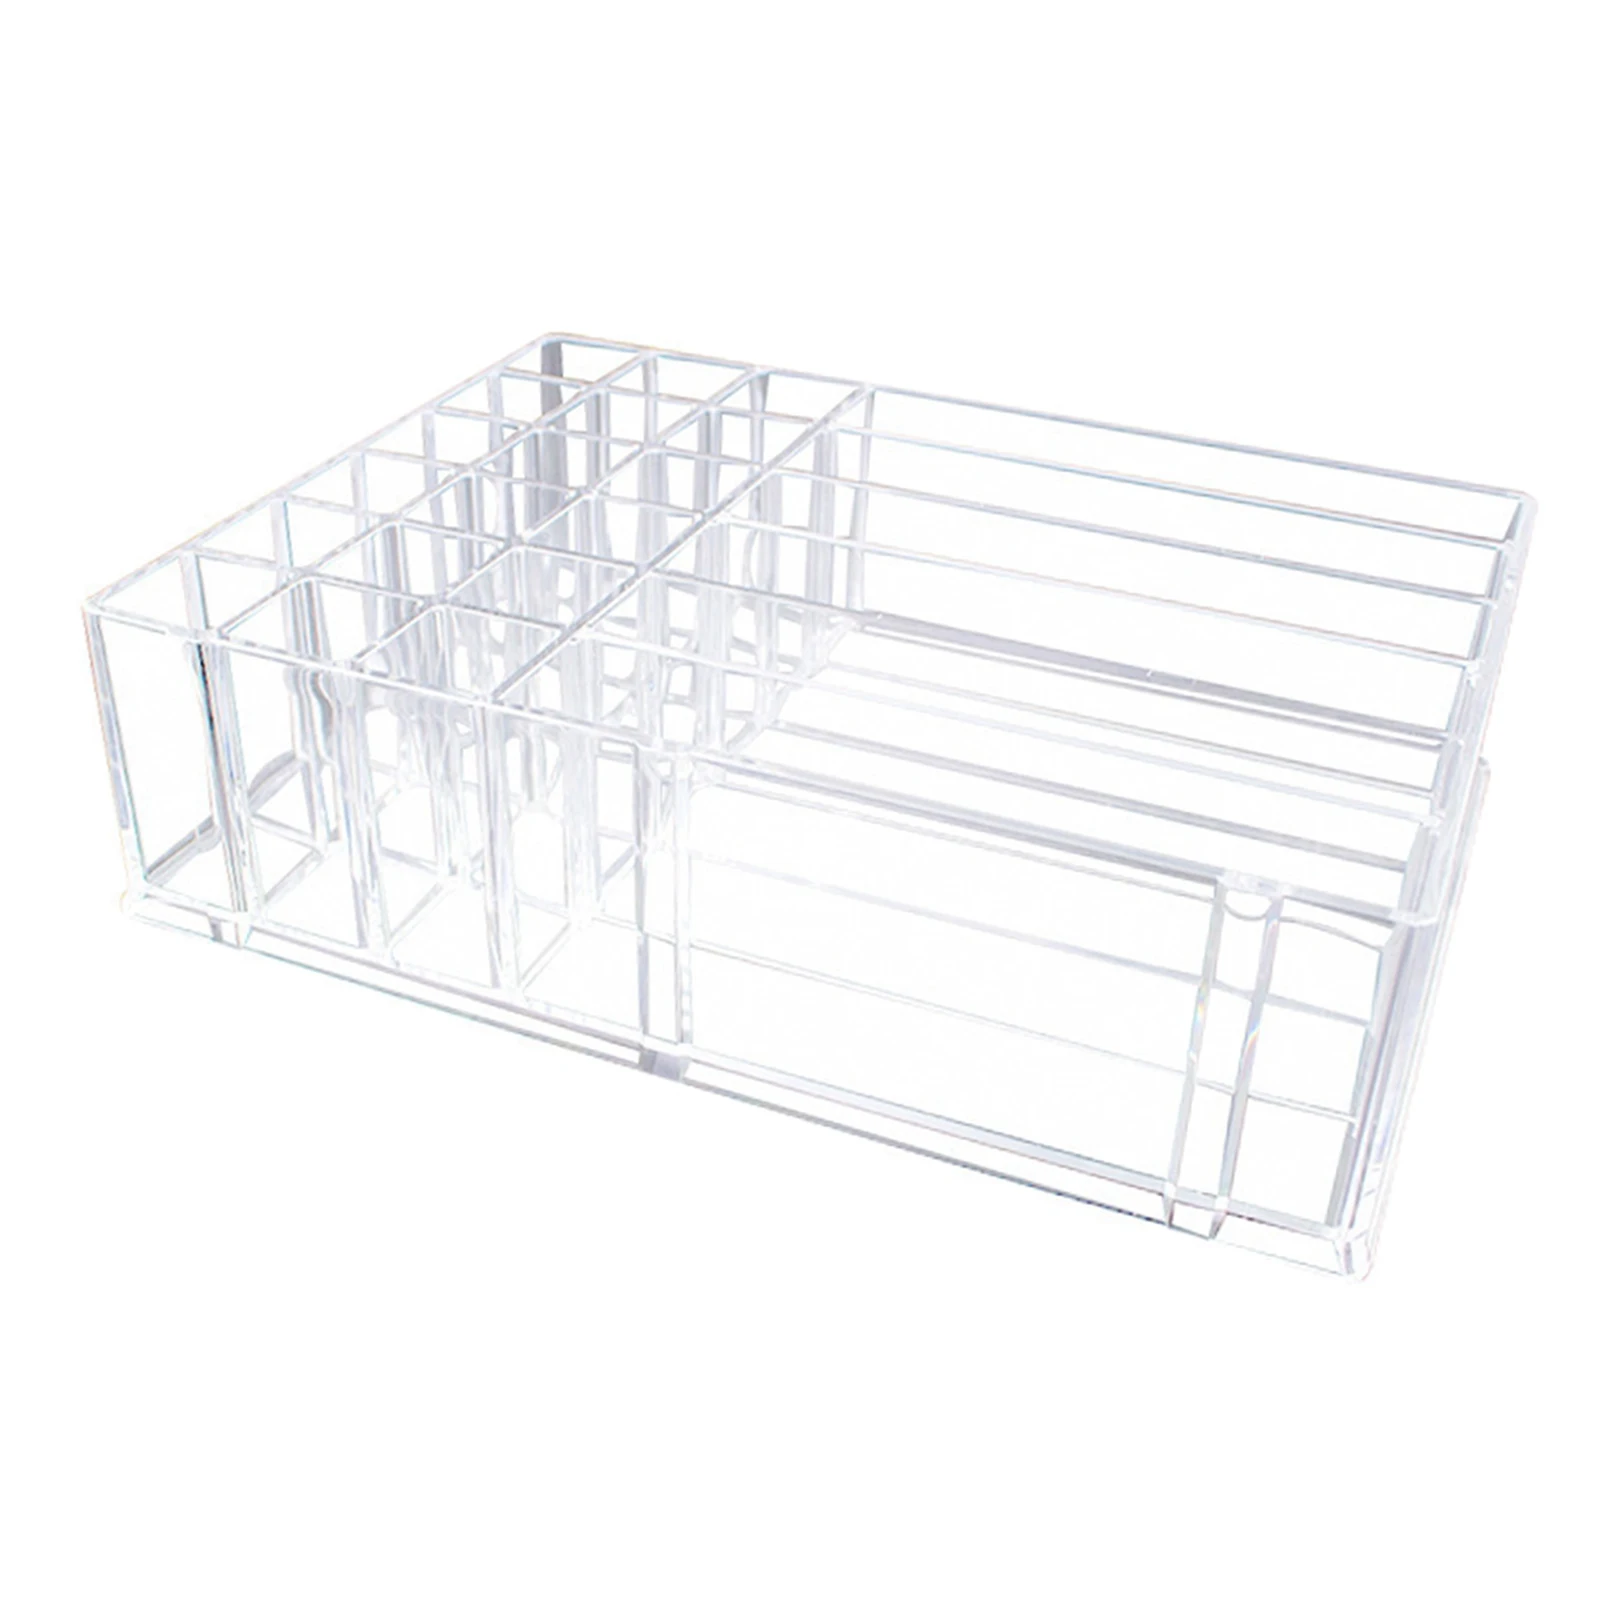  Organizers and Transparent Acrylic Make Organizer Holder with Detachable Drawer Divider